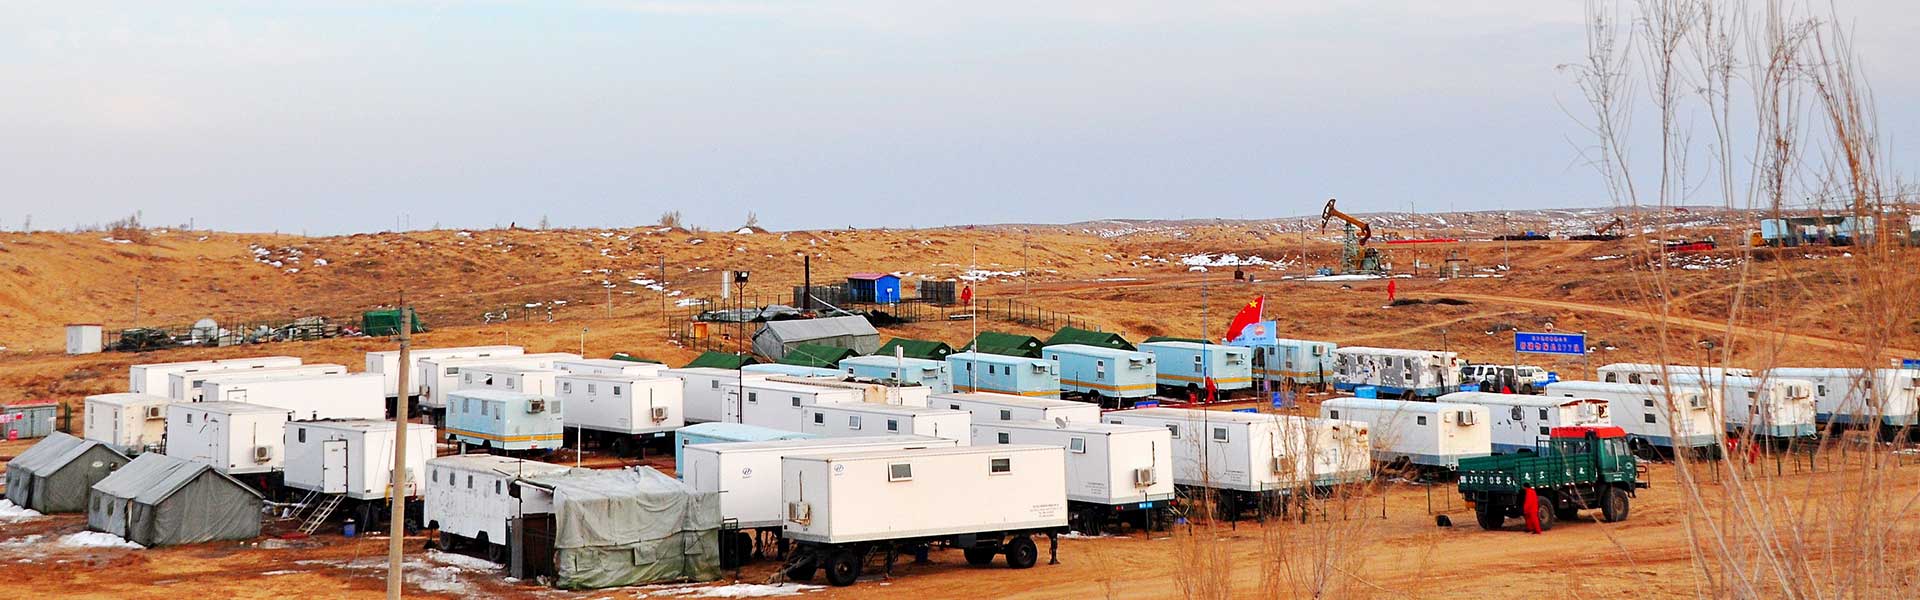 Mobile Shelter Trailers in China